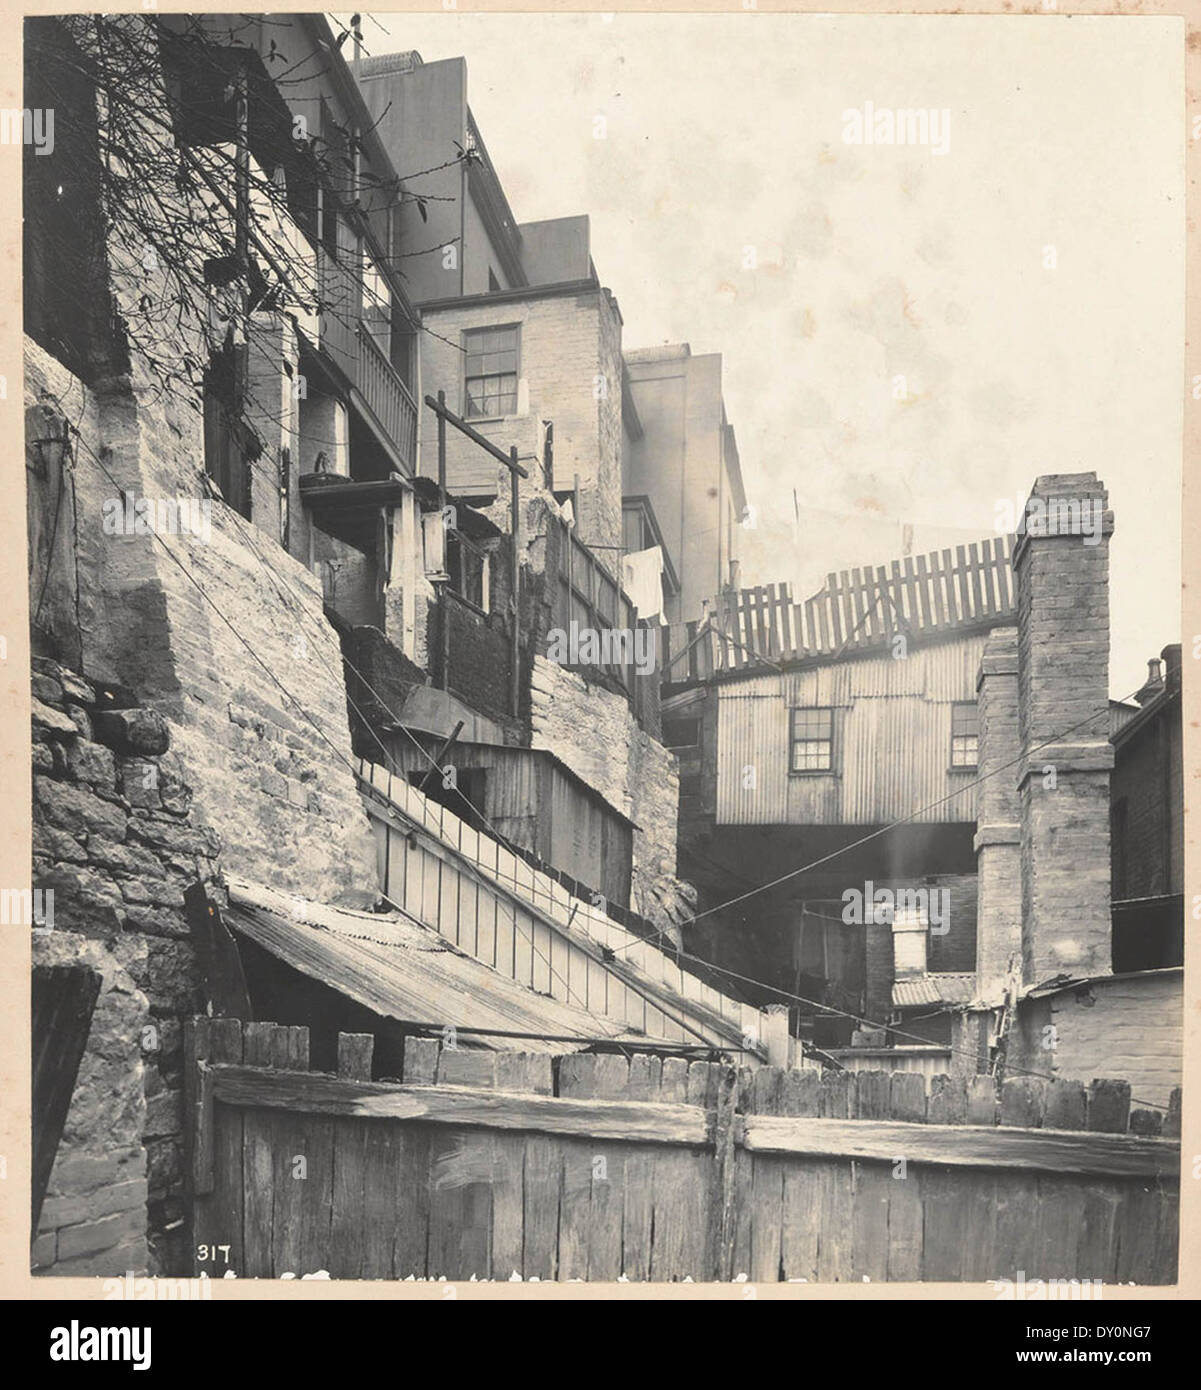 At rear of Gloucester-street, from Views taken during Cleansing Operations, Quarantine Area, Sydney, 1900, Vol. V / under the supervision of Mr George McCredie, F.I.A., N.S.W. photographed by John Degotardi Jr. Stock Photo